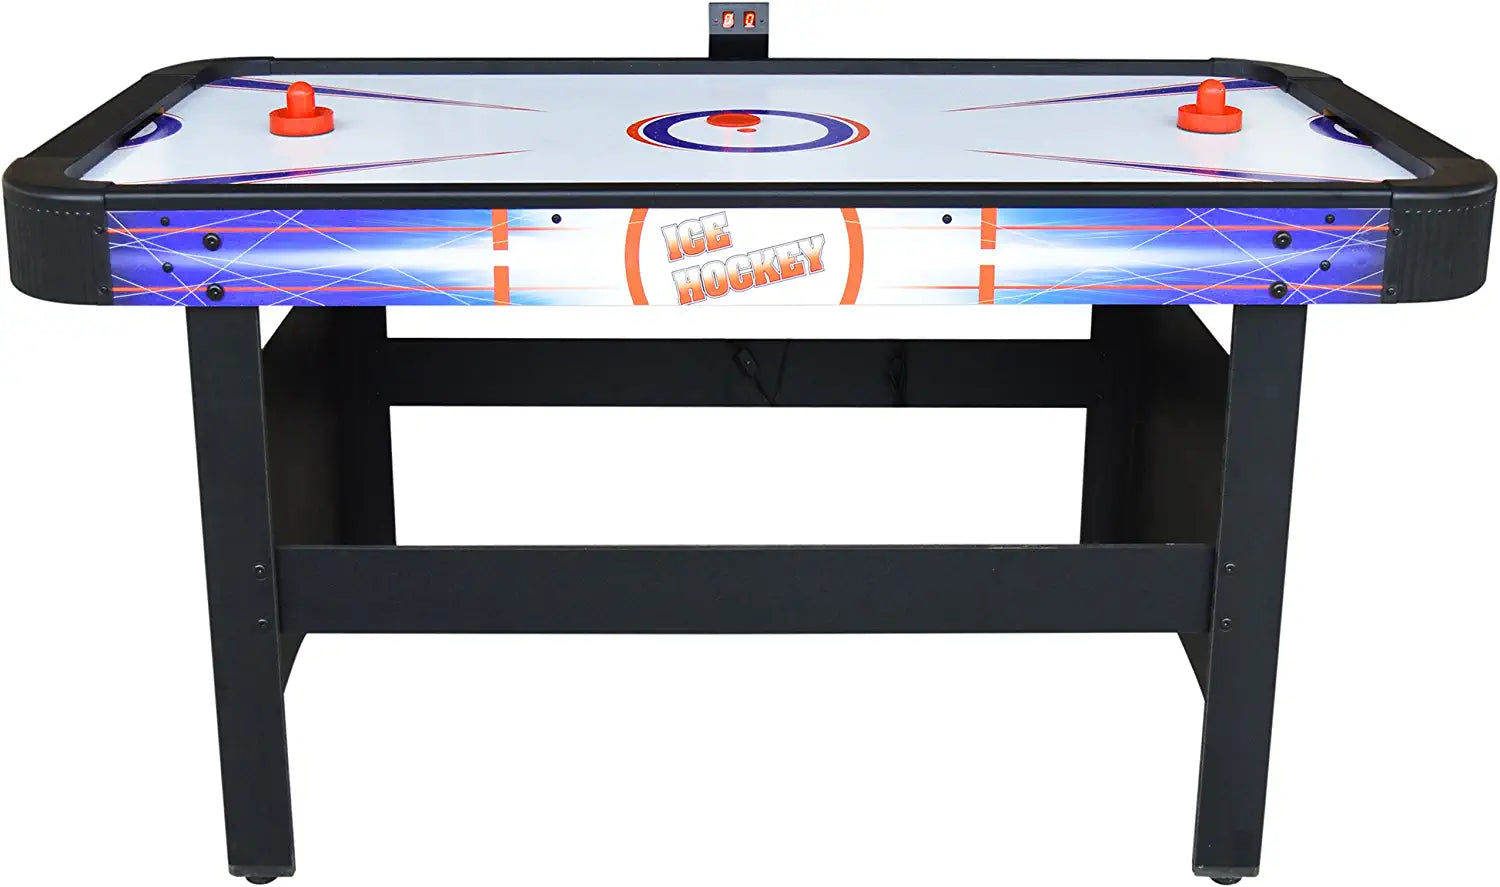 Hathaway Patriot 5-Ft Air Hockey Table for Kids and Adults, Great for Family Recreation Game Rooms, Electronic Scoring, Leg Levelers and Built-in Puck Return √É¬¢√¢‚Äö¬¨√¢‚Ç¨≈ì Includes Strikers and Pucks, Blue/Black